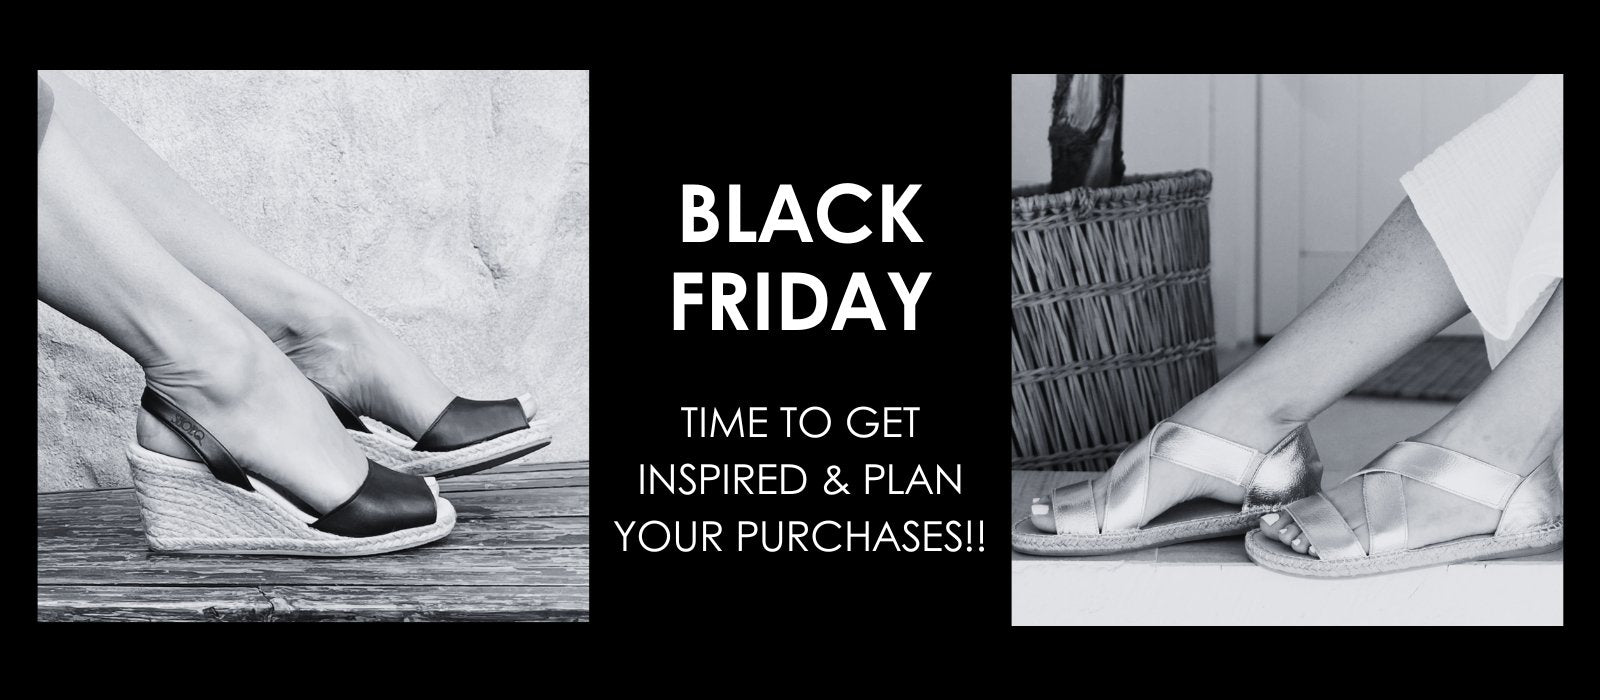 Shoeq’s Black Friday collection - What to buy, how to wear, where to go! - Shoeq